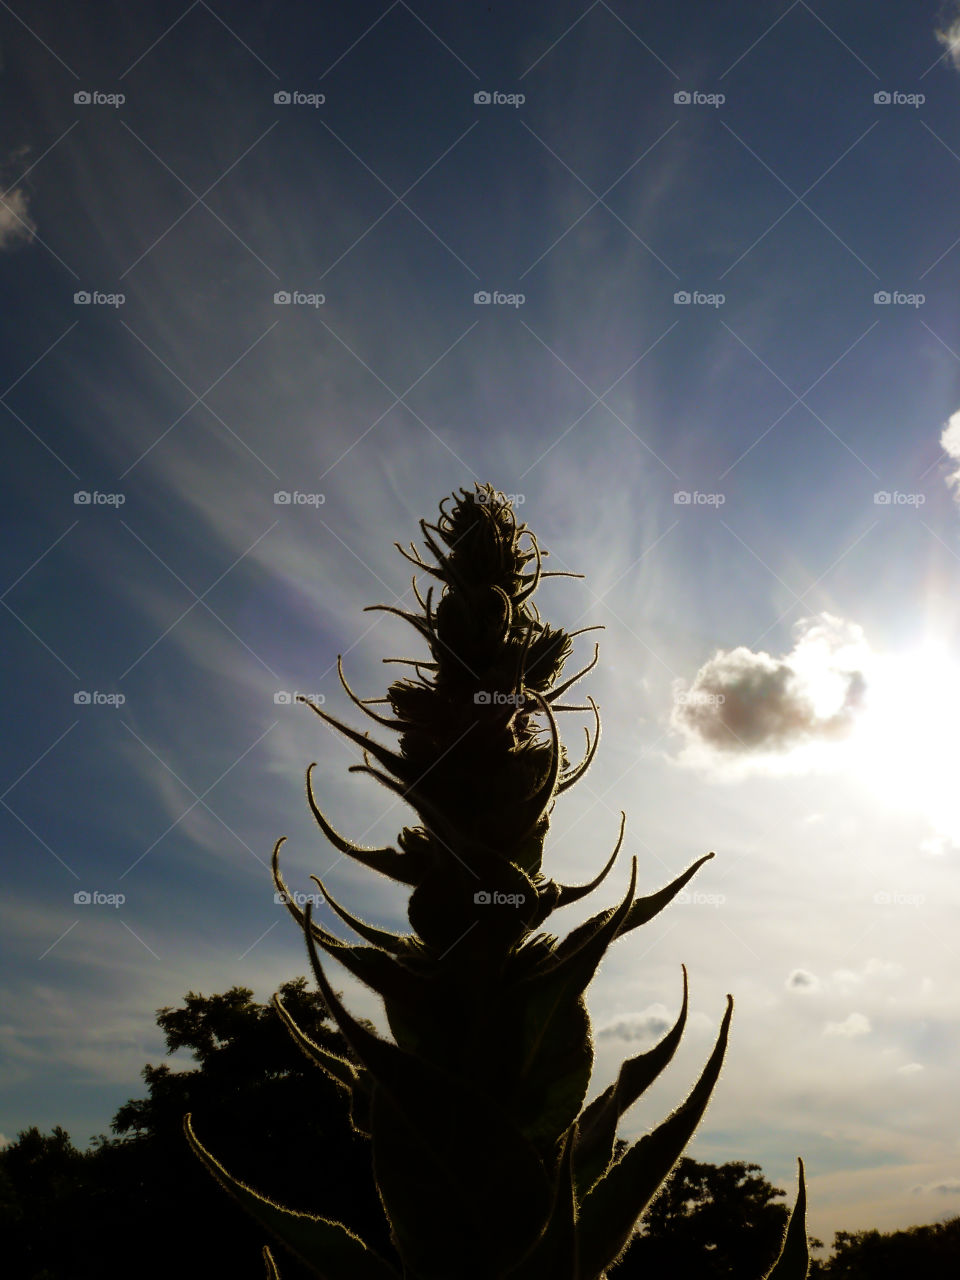 Low angle view of silhouette of plant growing against cloudy sky in Berlin, Germany.